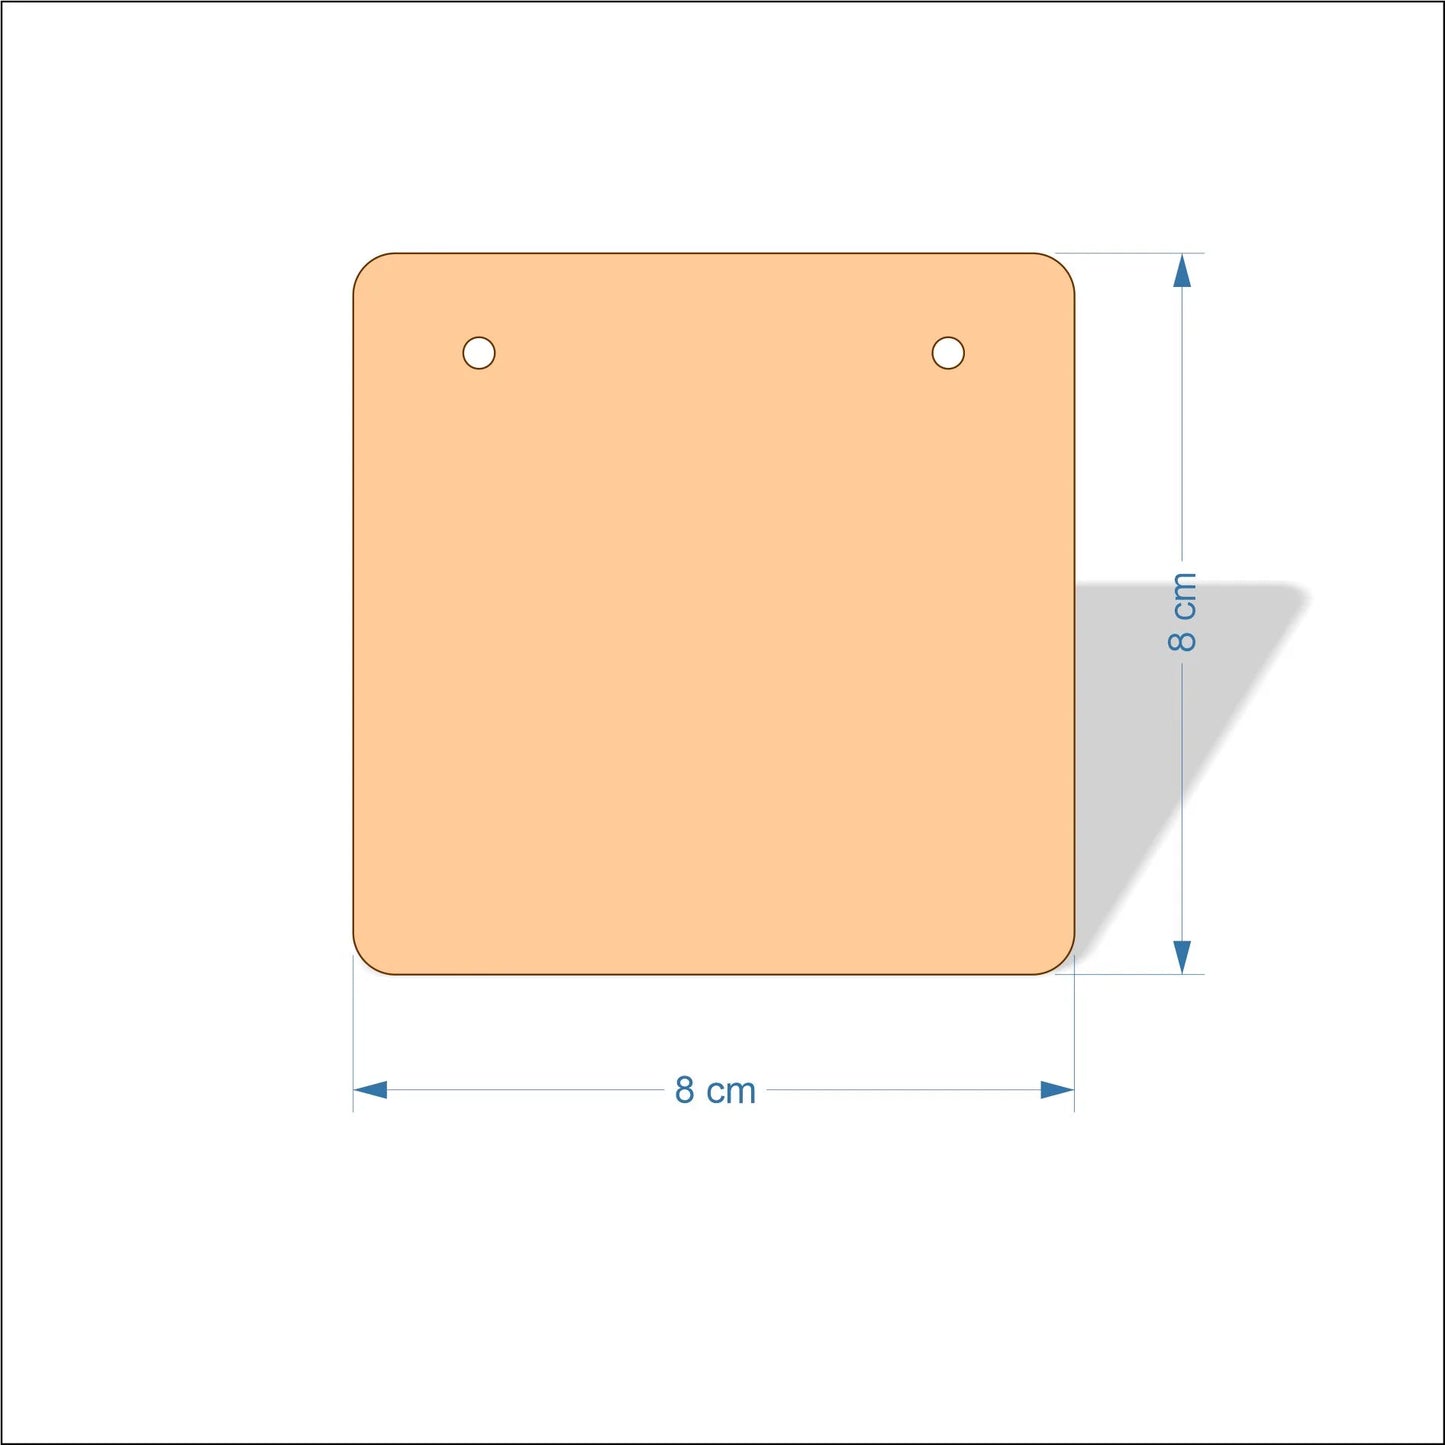 8 cm Wide Blank board plaques with rounded corners - plywood